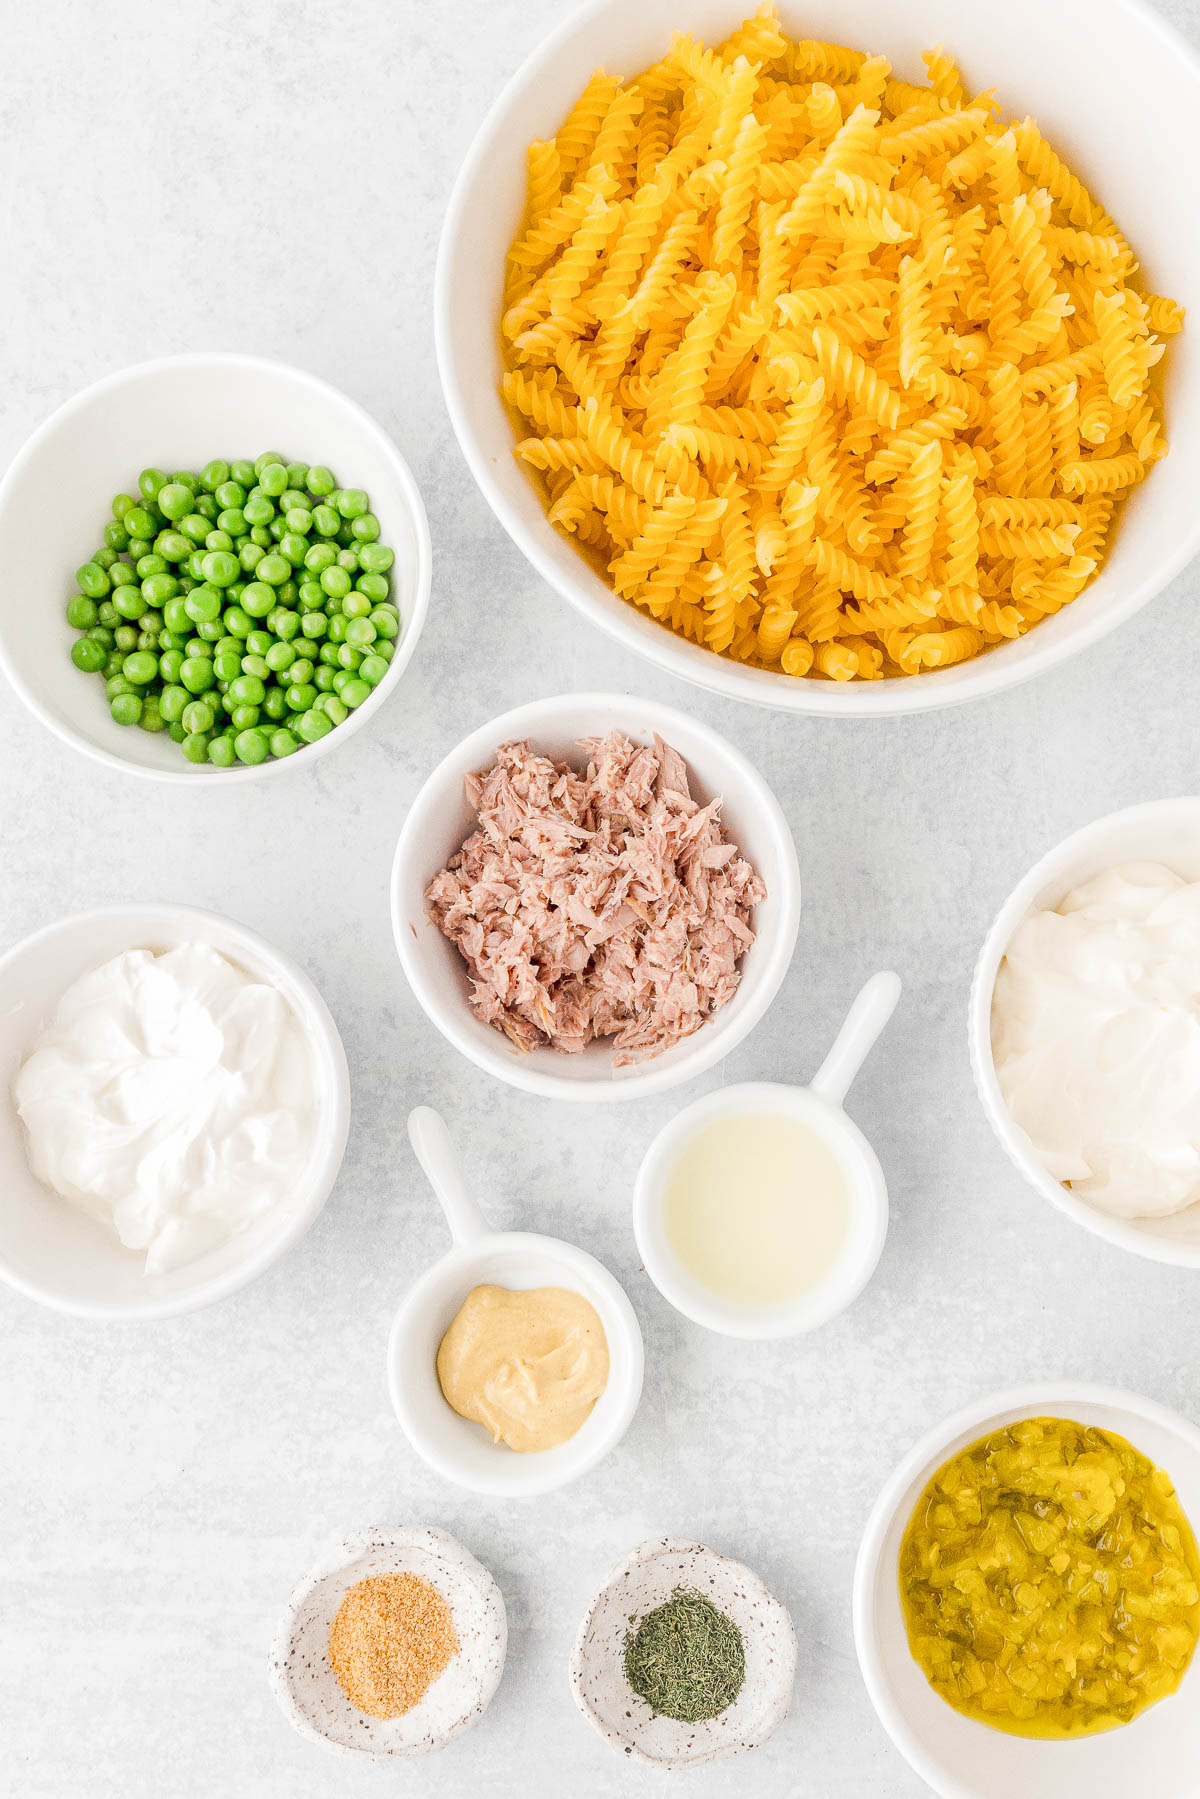 Ingredients for a pasta salad: uncooked pasta spirals, peas, shredded meat, mayonnaise, sour cream, mustard, lemon juice, and spices neatly arranged in bowls on a white surface.